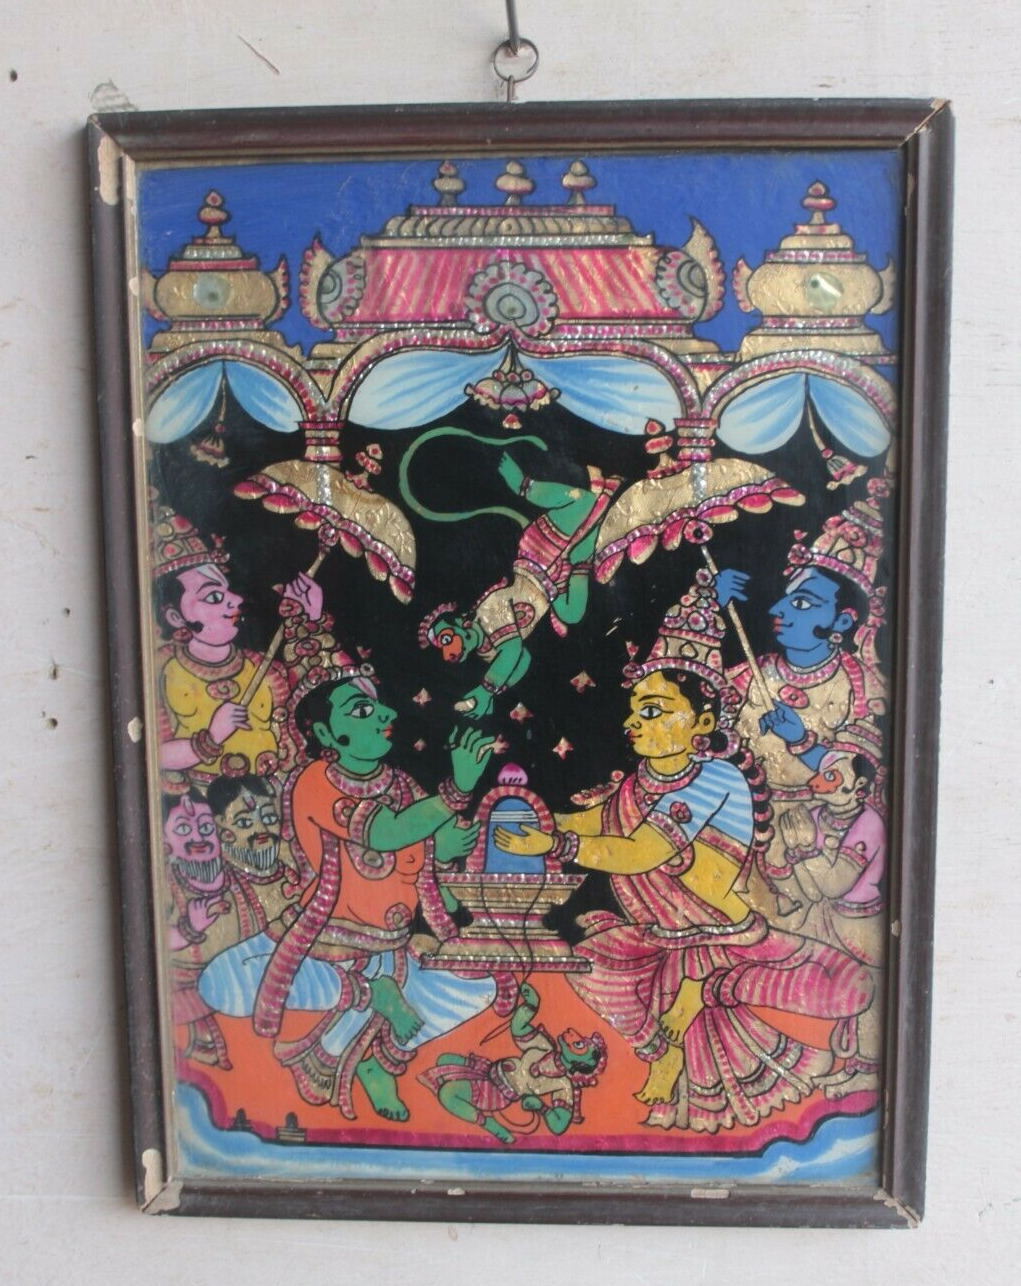 1900s VINTAGE GLASS PAINTING LORD RAM & SITA RETURNING FROM EXILE HANDMADE BX-9